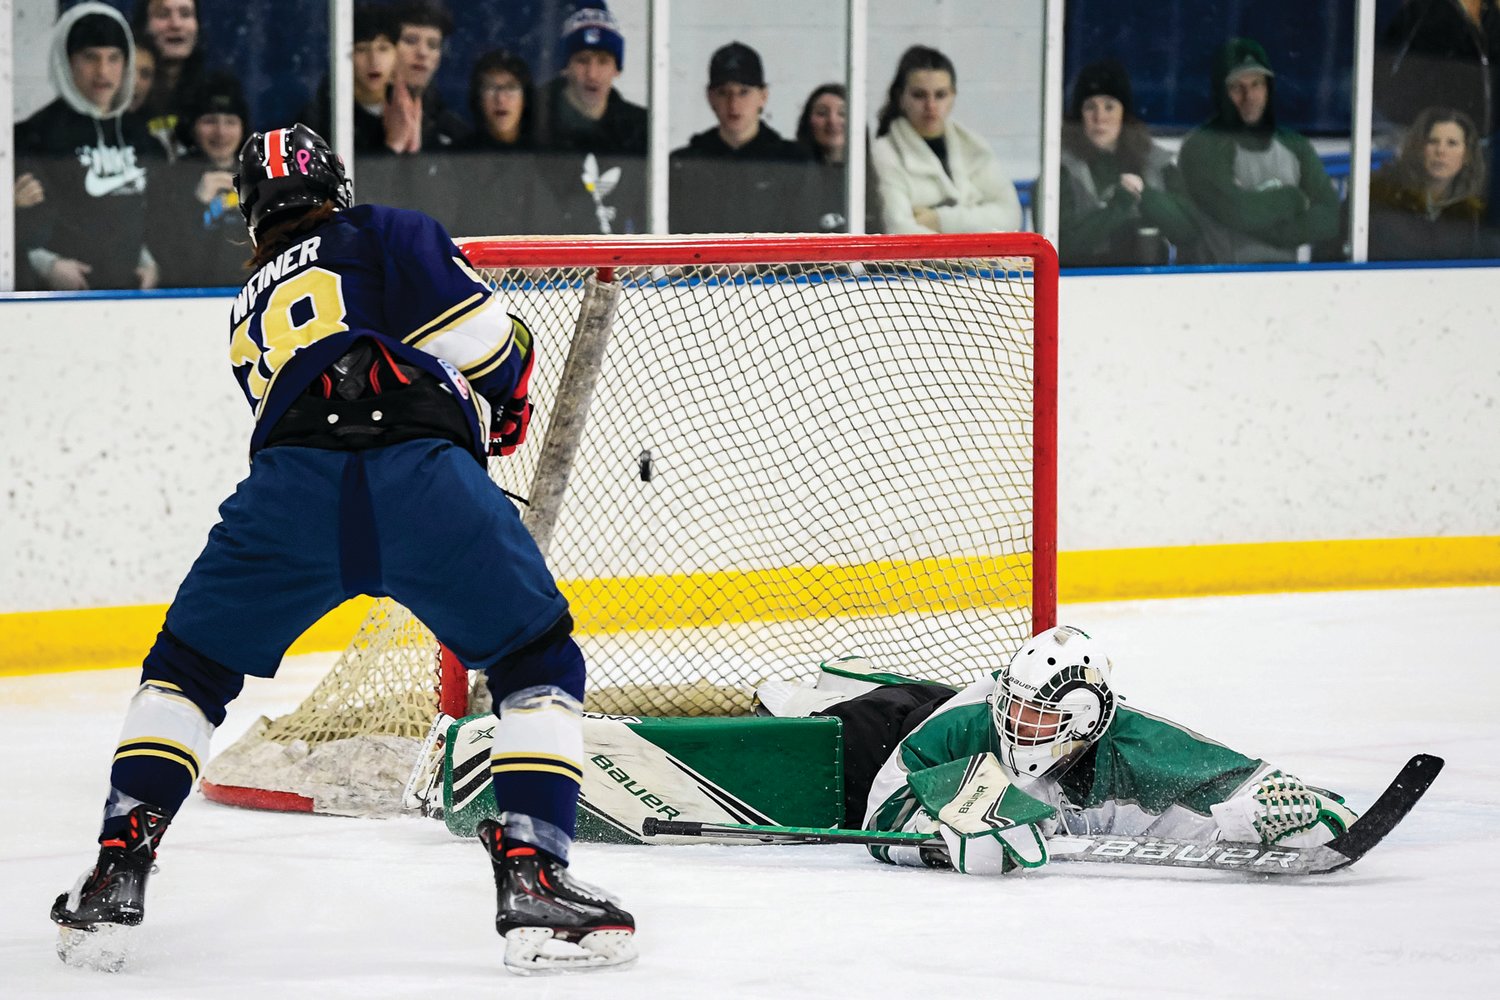 CR South’s Jake Weiner scores the second goal in the first period over a sprawling Jacob Gilbert.